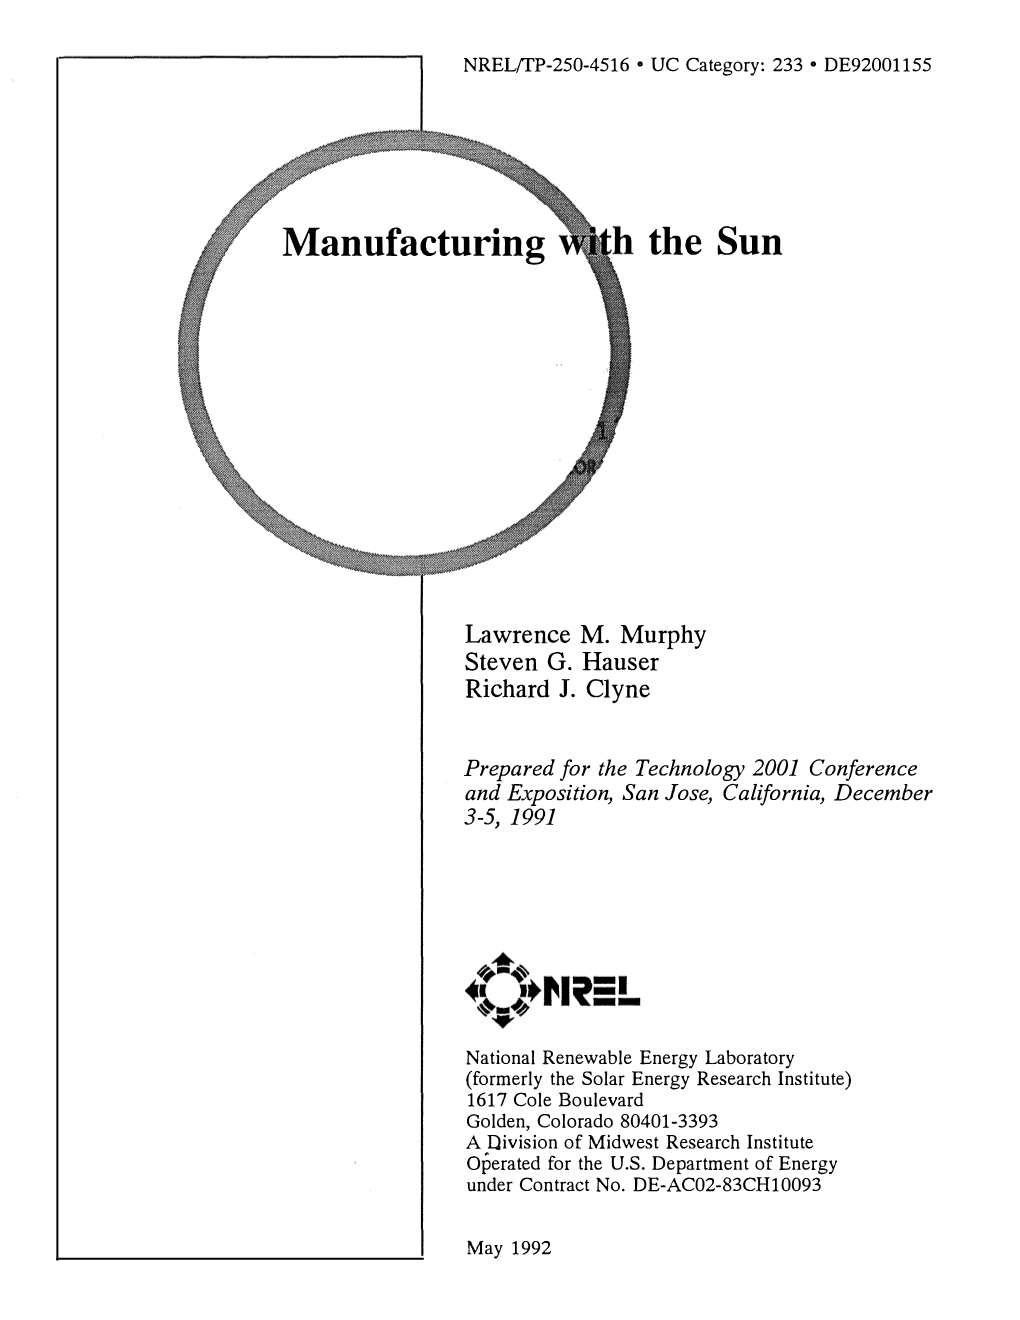 Manufacturing with the Sun